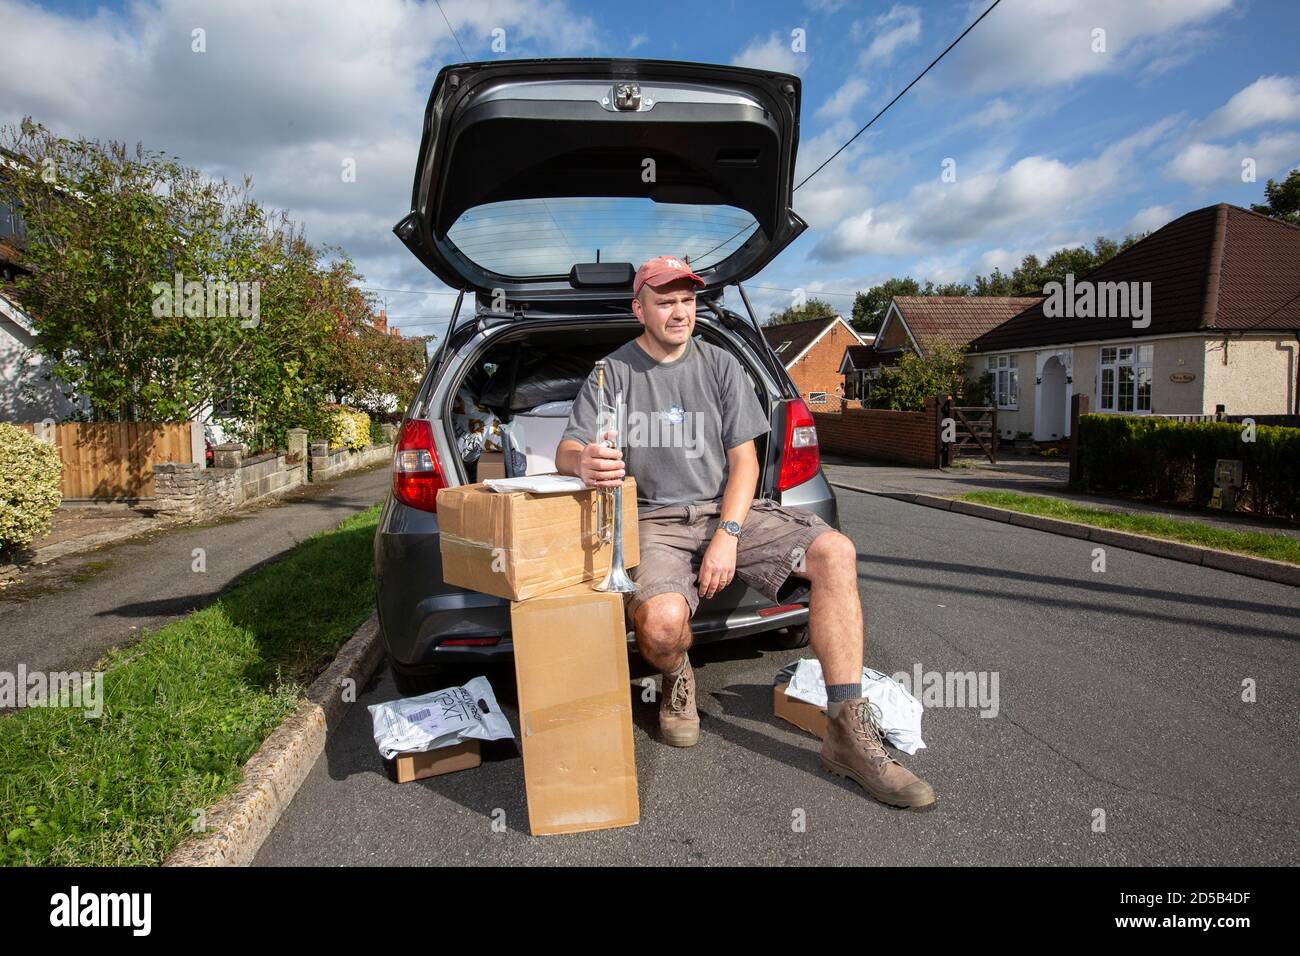 Out of work trumpet player, working as a delivery driver to pay his mortgage due to the coronavirus pandemic closing all theatres and music venues, UK Stock Photo